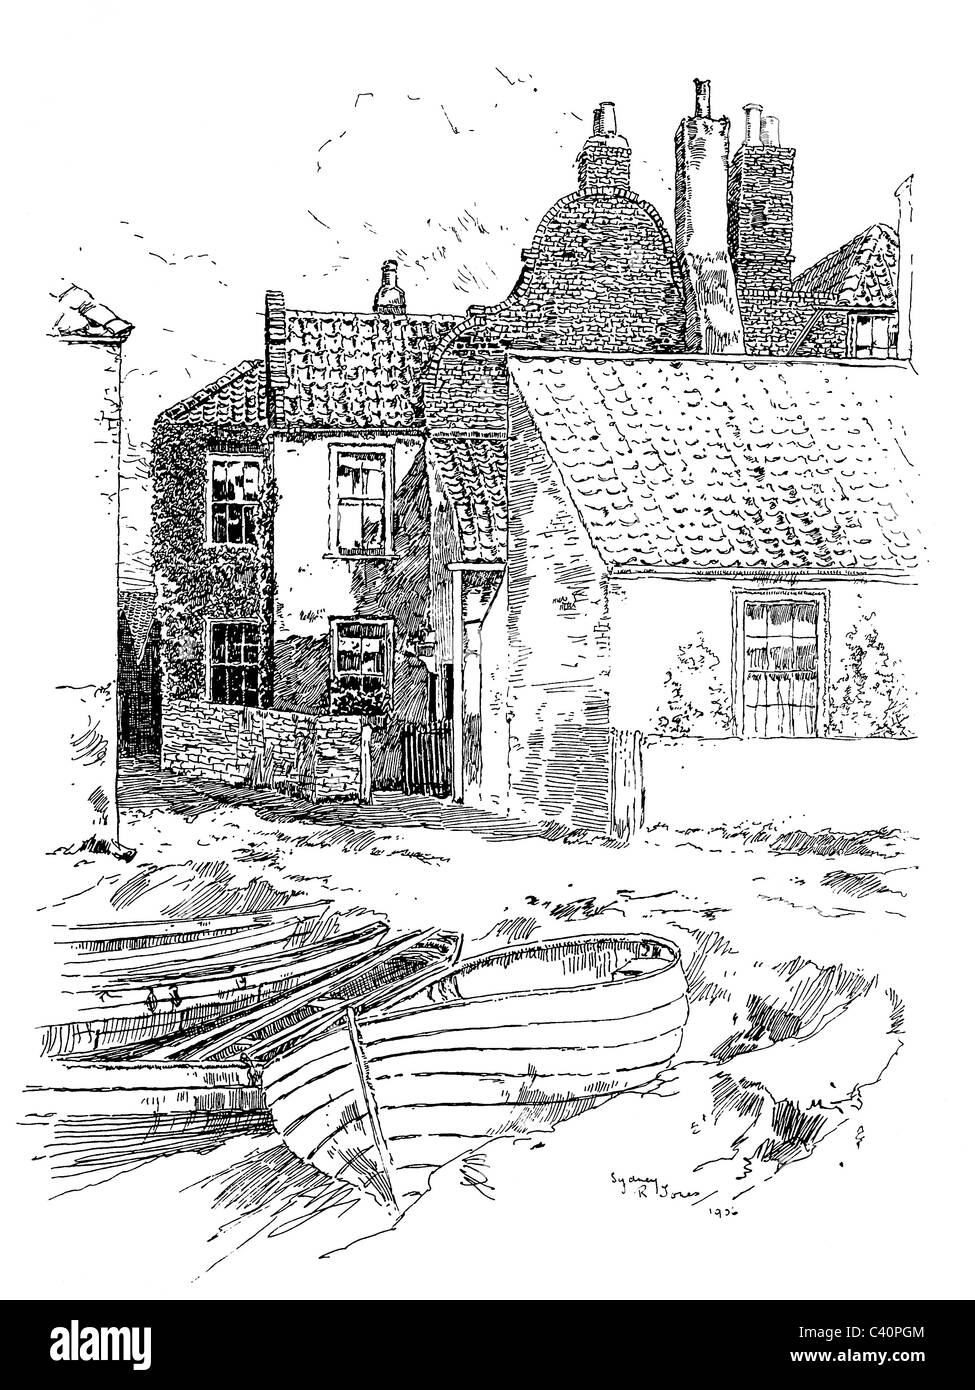 Yarmouth, Norfolk - pen and ink illustration from 'Old English Country Cottages' by Charles Holme, 1906. Stock Photo